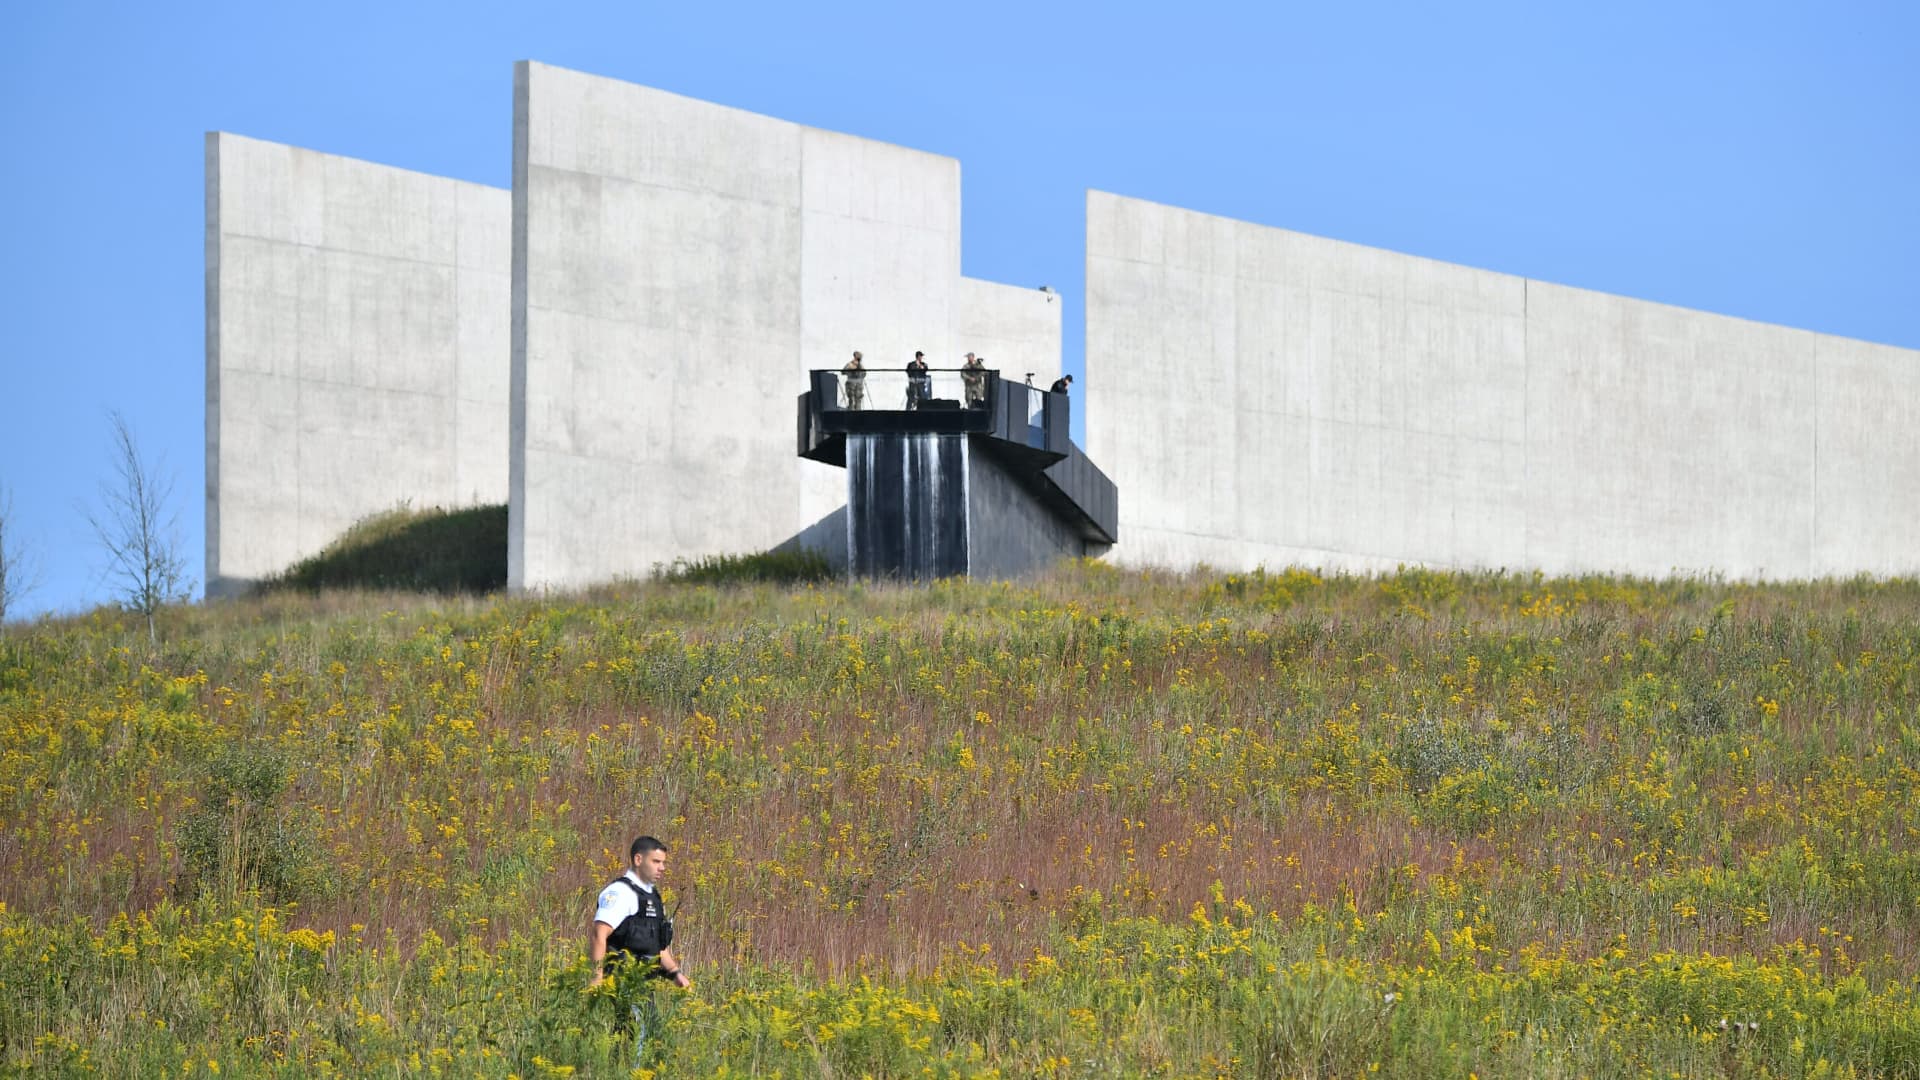 Security is seen during a 9/11 commemoration at the Flight 93 National Memorial in Shanksville, Pennsylvania on September 11, 2021.